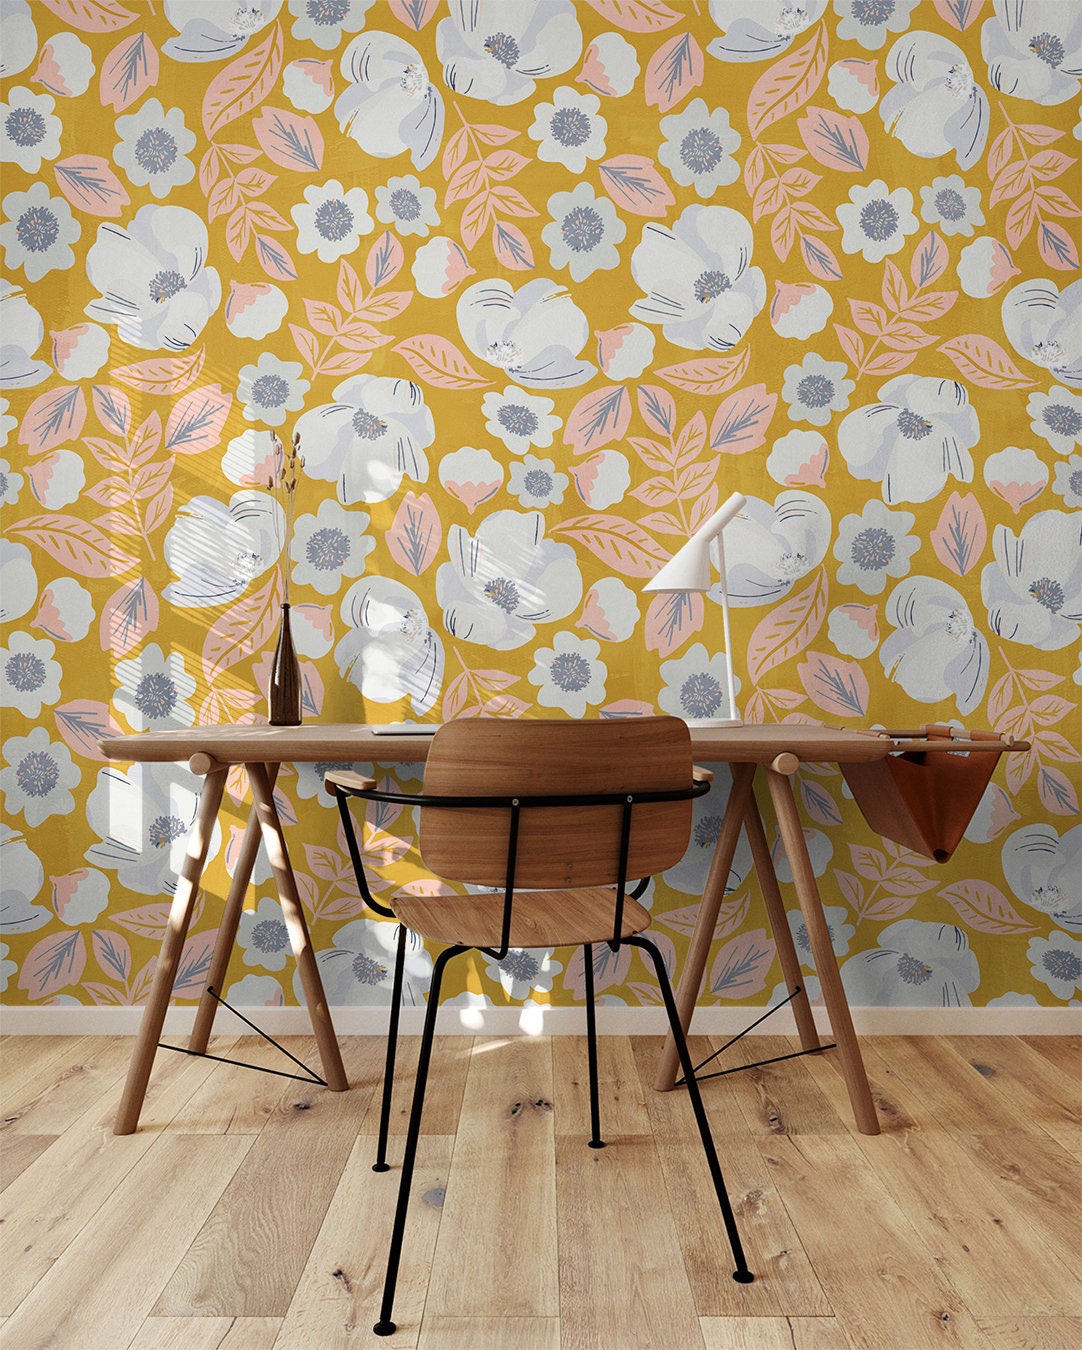 Yellow White Floral Wallpaper | Removable Wallpaper | Peel And Stick Wallpaper | Adhesive Wallpaper | Wall Paper Peel Stick Wall Mural 2305 - JamesAndColors